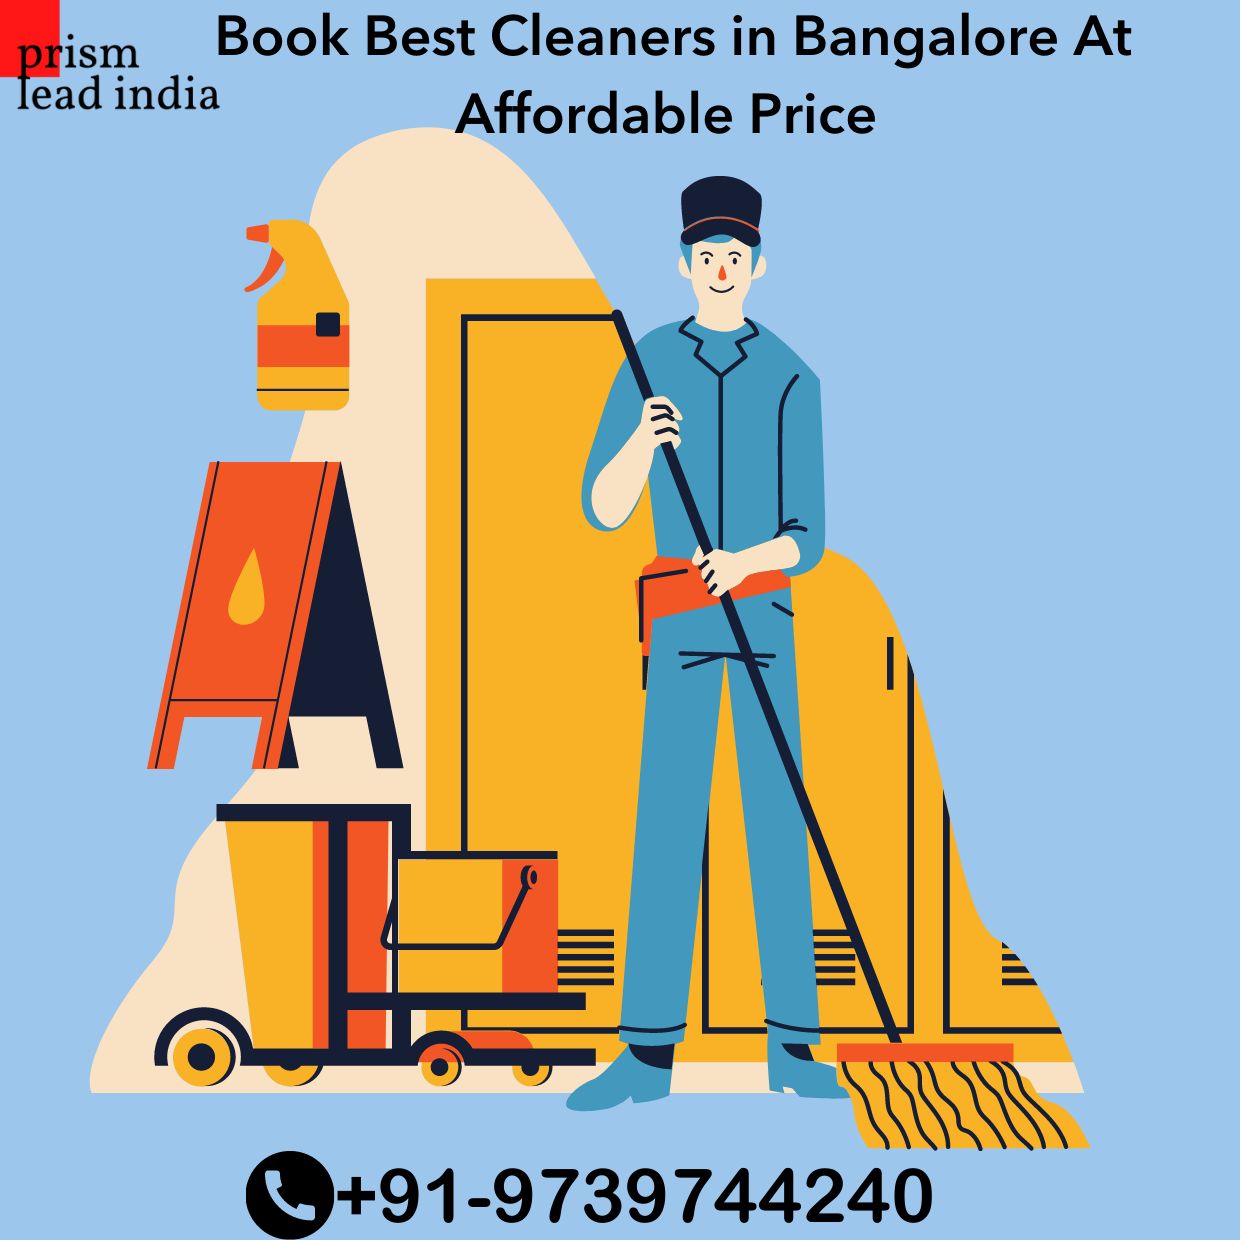 Best Bathroom Cleaning Services Near Me in Bangalore # PRISM LEAD INDIA